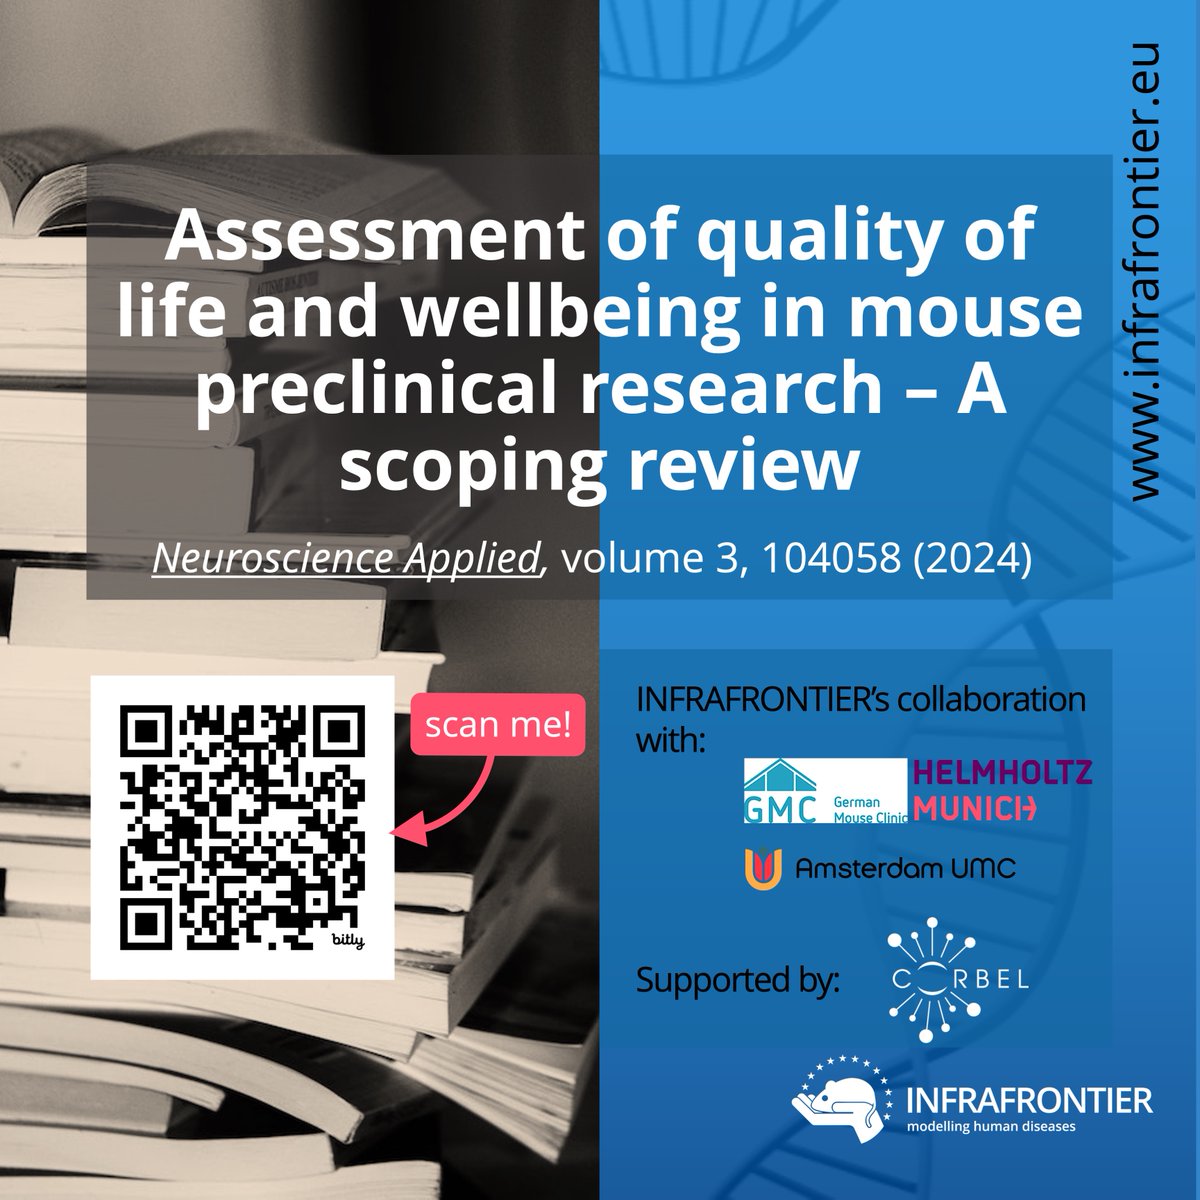 🔉Happy to announce a new publication by INFRAFRONTIER in collaboration with the German Mouse Clinic at @HelmholtzMunich. This work suggests the standardisation of #QualityOfLife & #Wellbeing assessment protocols in mouse research to enhance its clinical trial relevance. 🤲🏻🐭🔬🏥